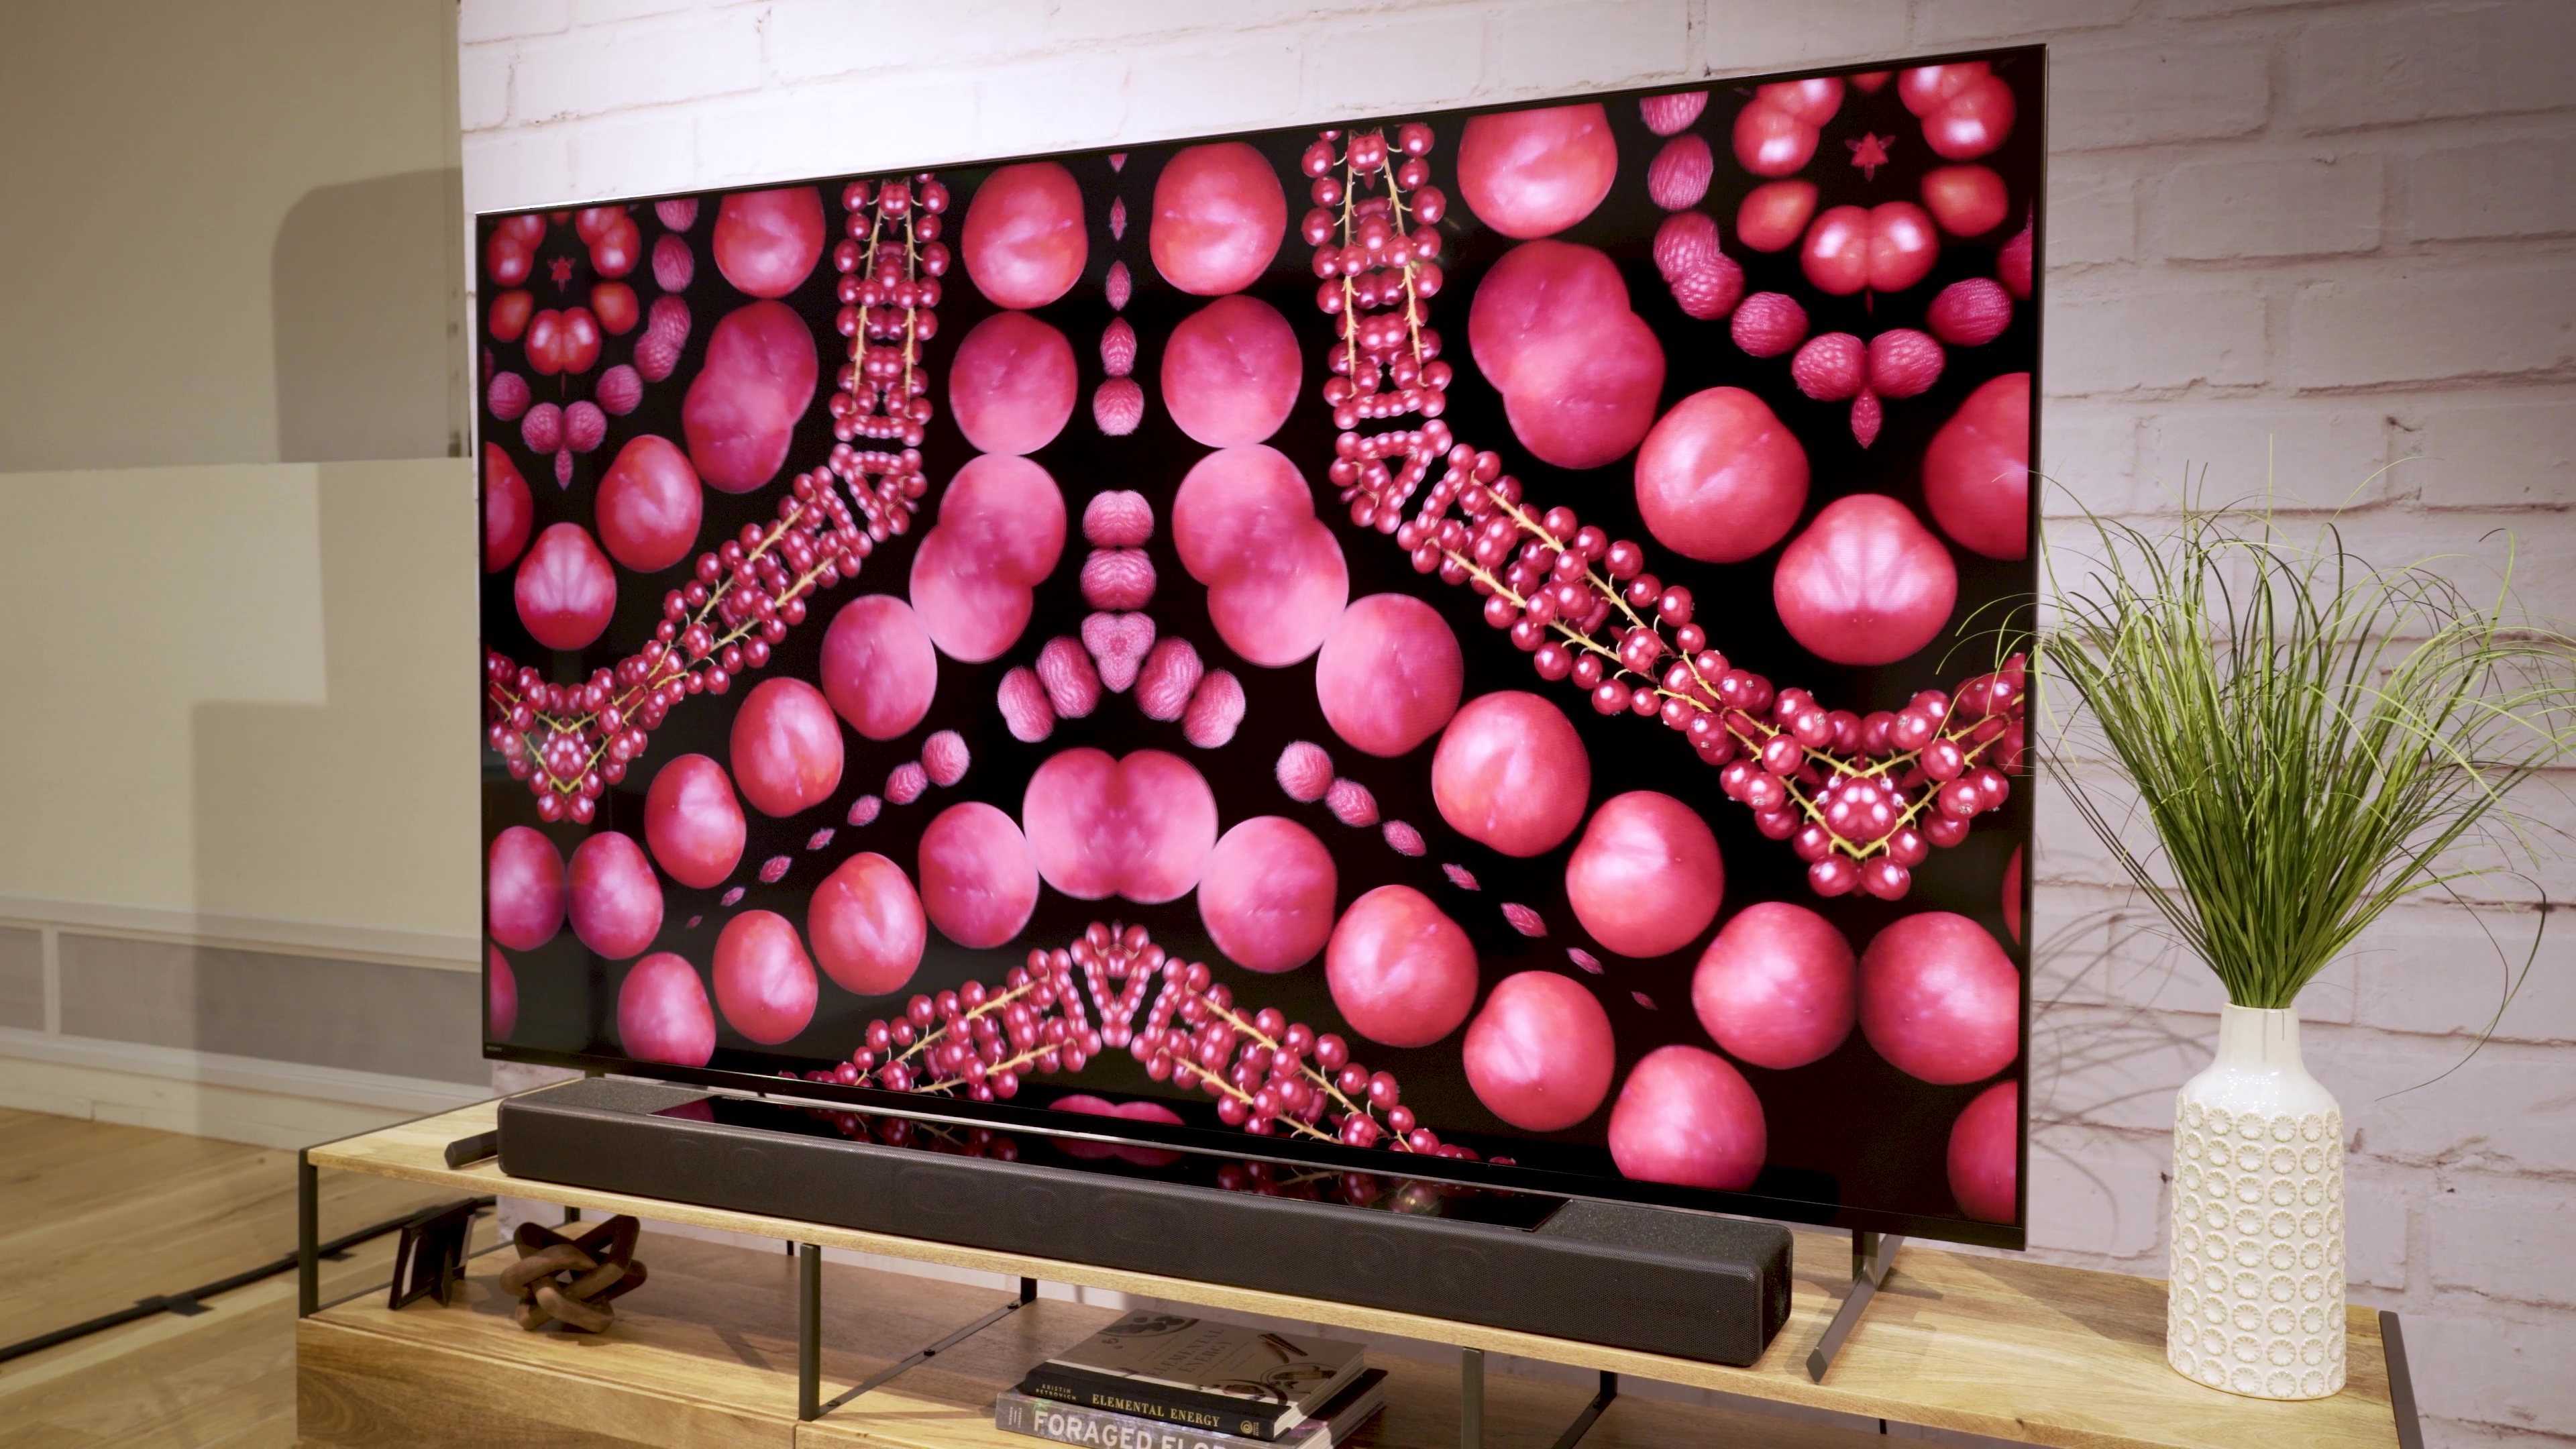 Why the Sony A80L OLED TV proves that brightness really isn't everything